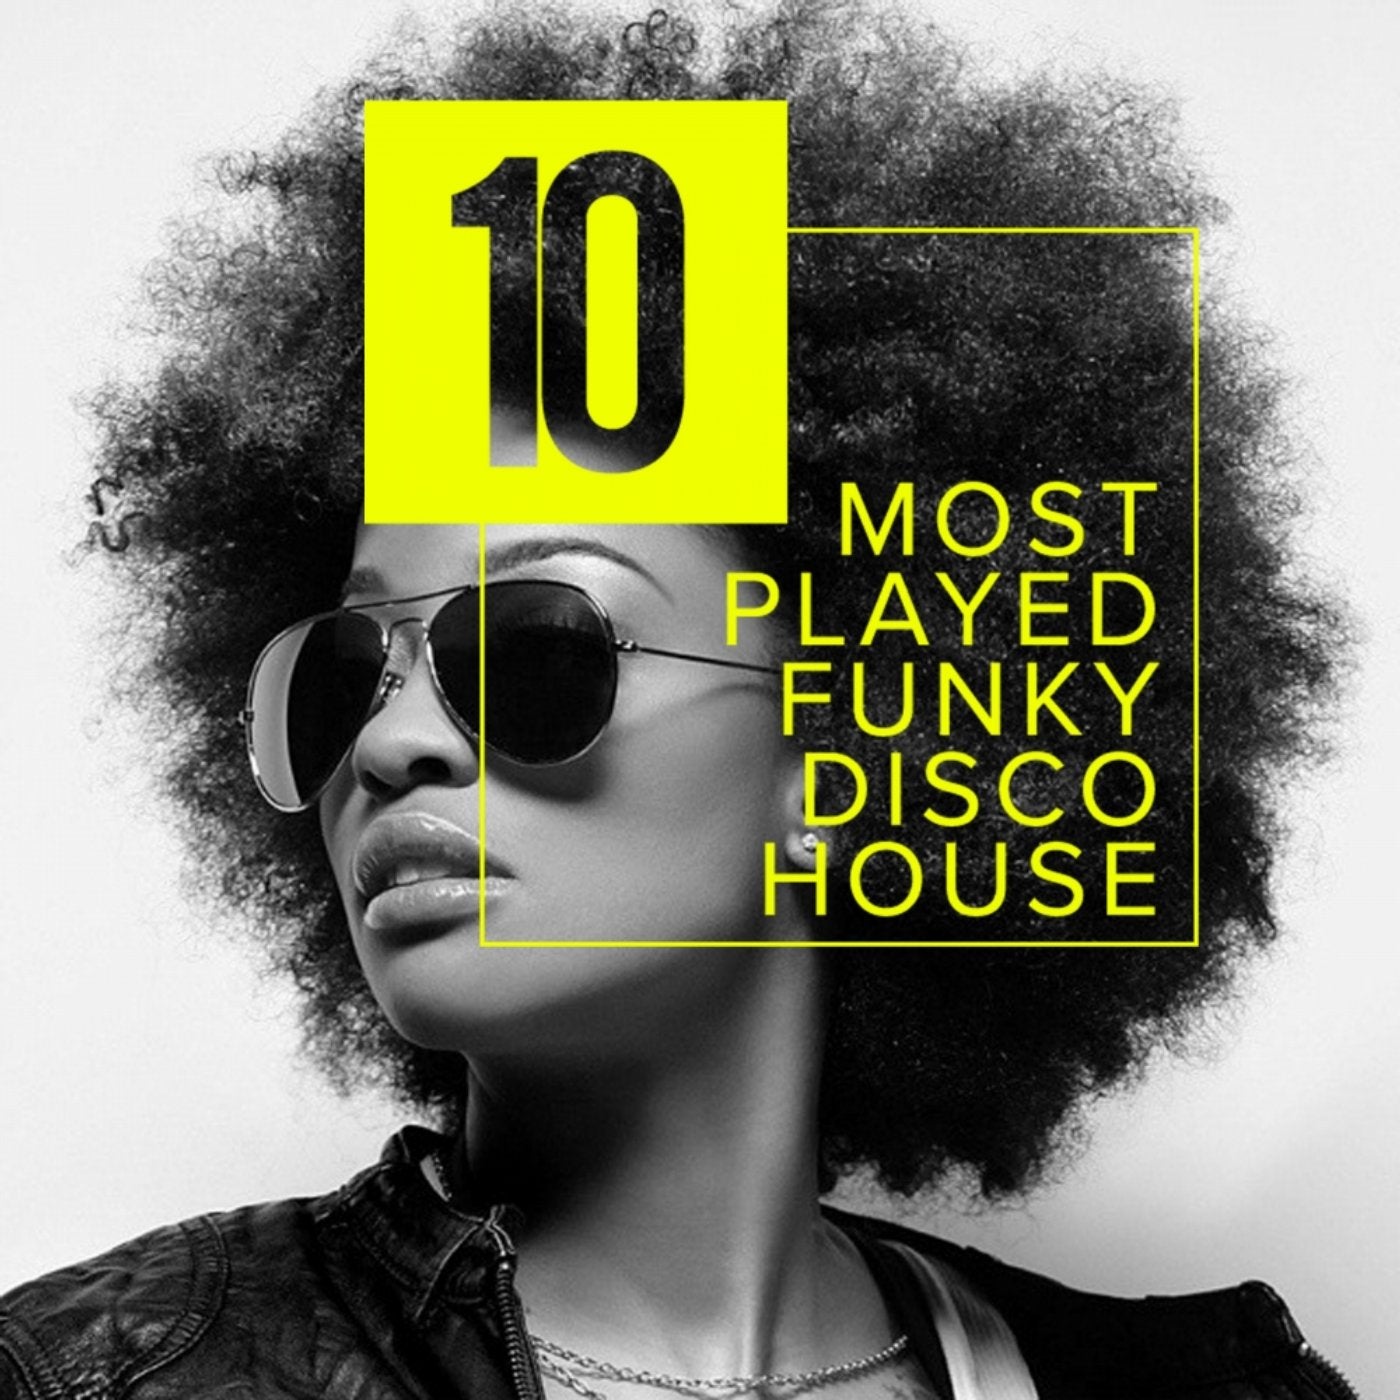 10 Most Played Funky Disco House